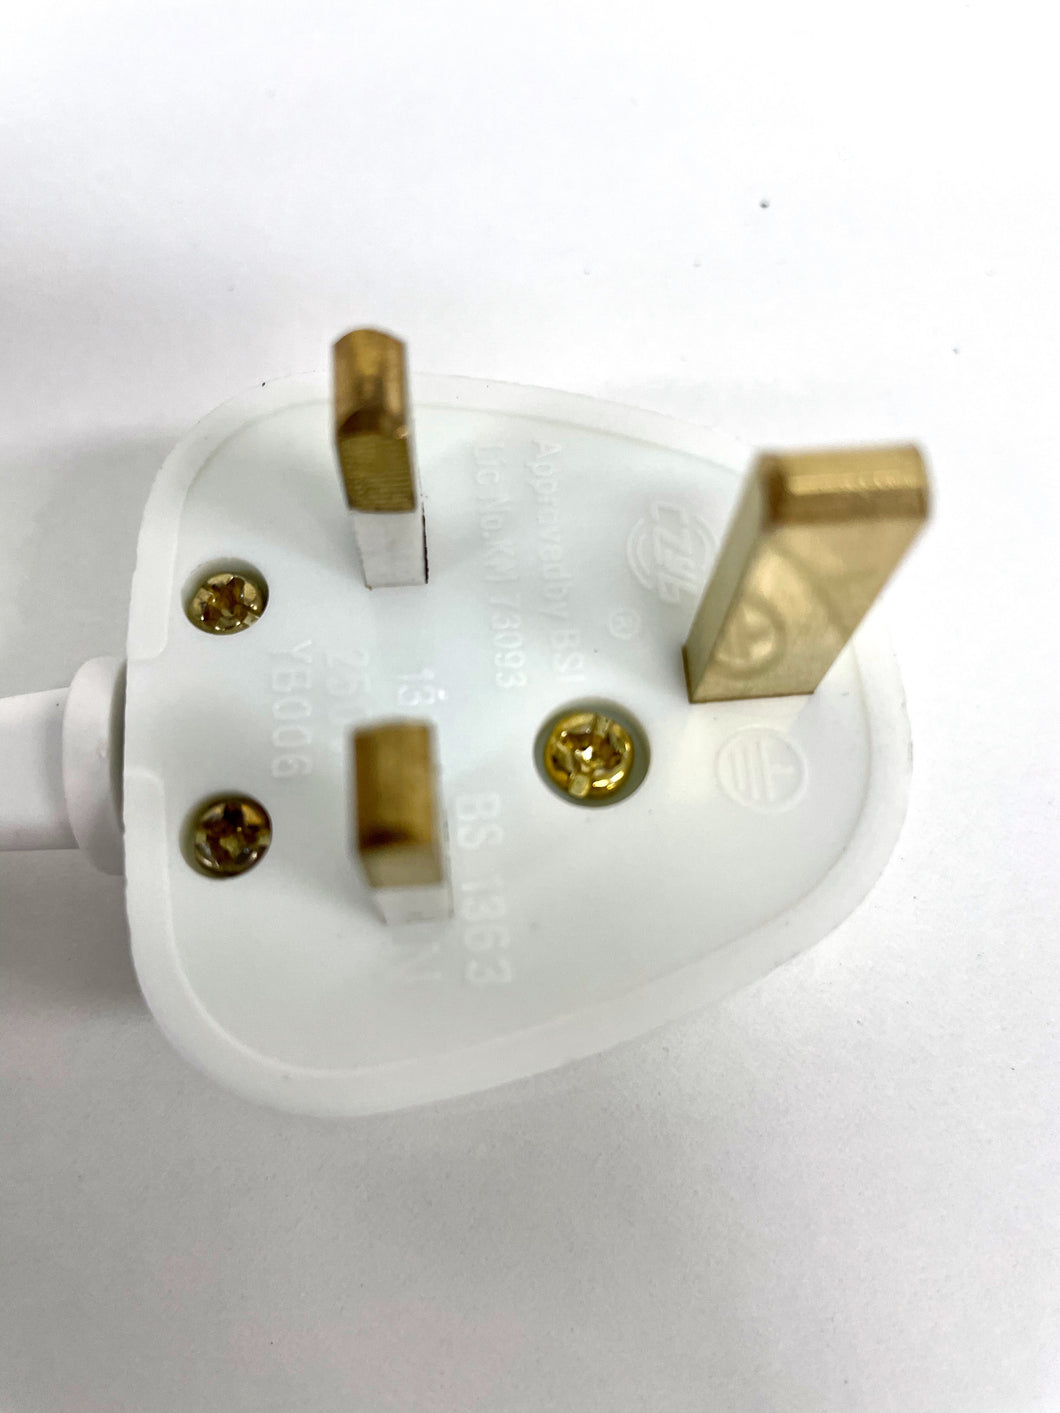 UK Electric Cord, Great Britain -UK Plug, Lamp Cable with switch 4m long